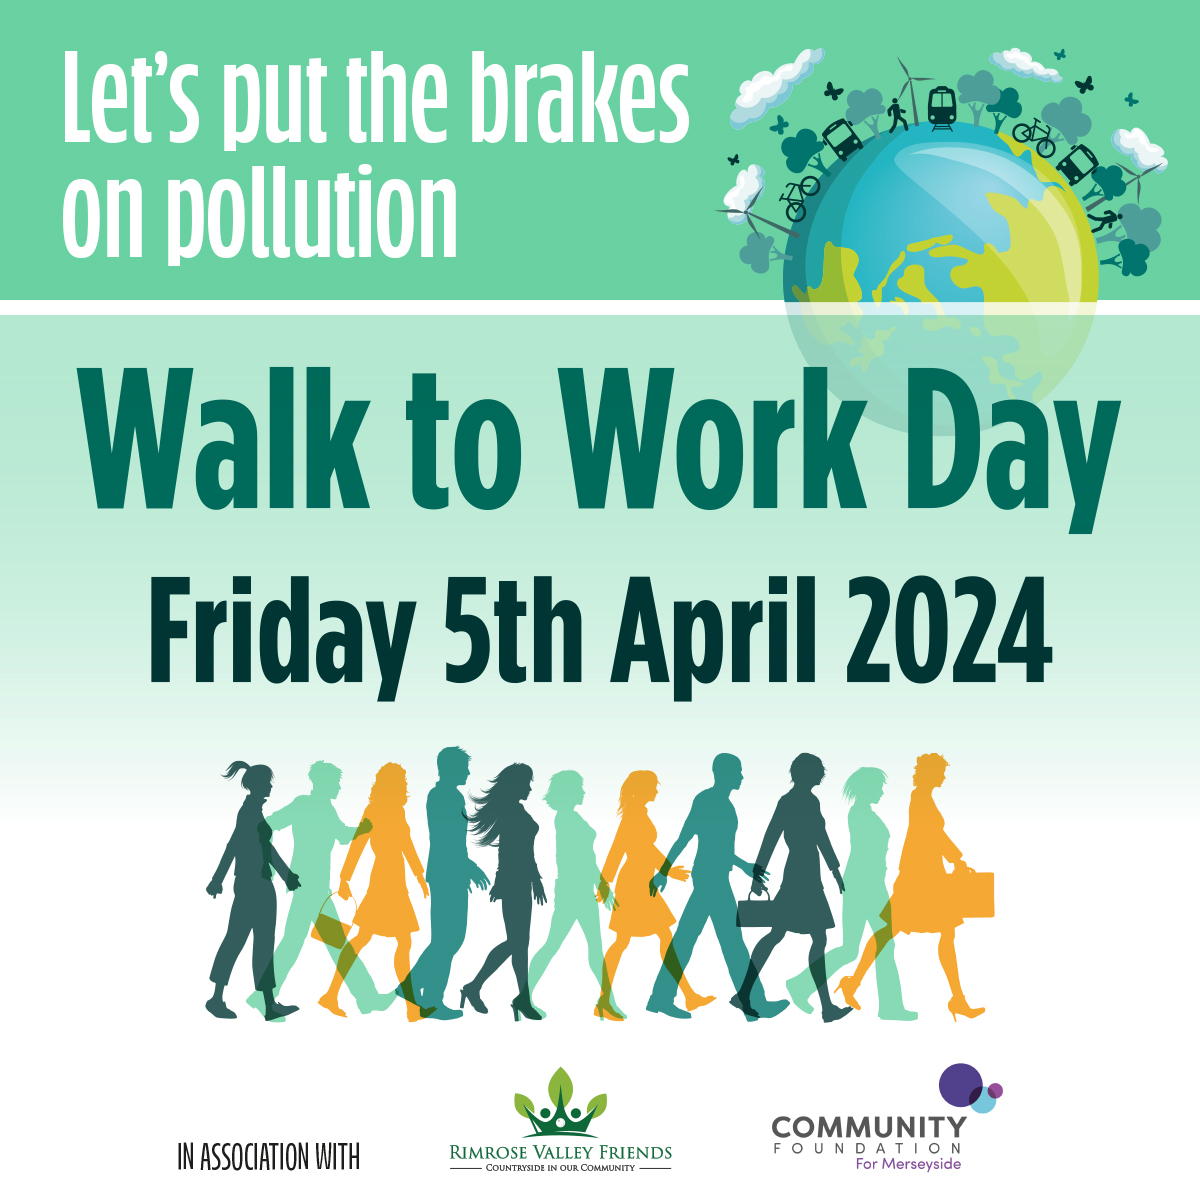 This Friday is Walk to Work Day! Obviously, this doesn't apply to everyone BUT, if you CAN walk to work, or even walk to your local bus stop or train station, please do. Leaving the car at home makes our air cleaner. Please take our quick survey👇 forms.office.com/r/ba4TzeeaPG?o…